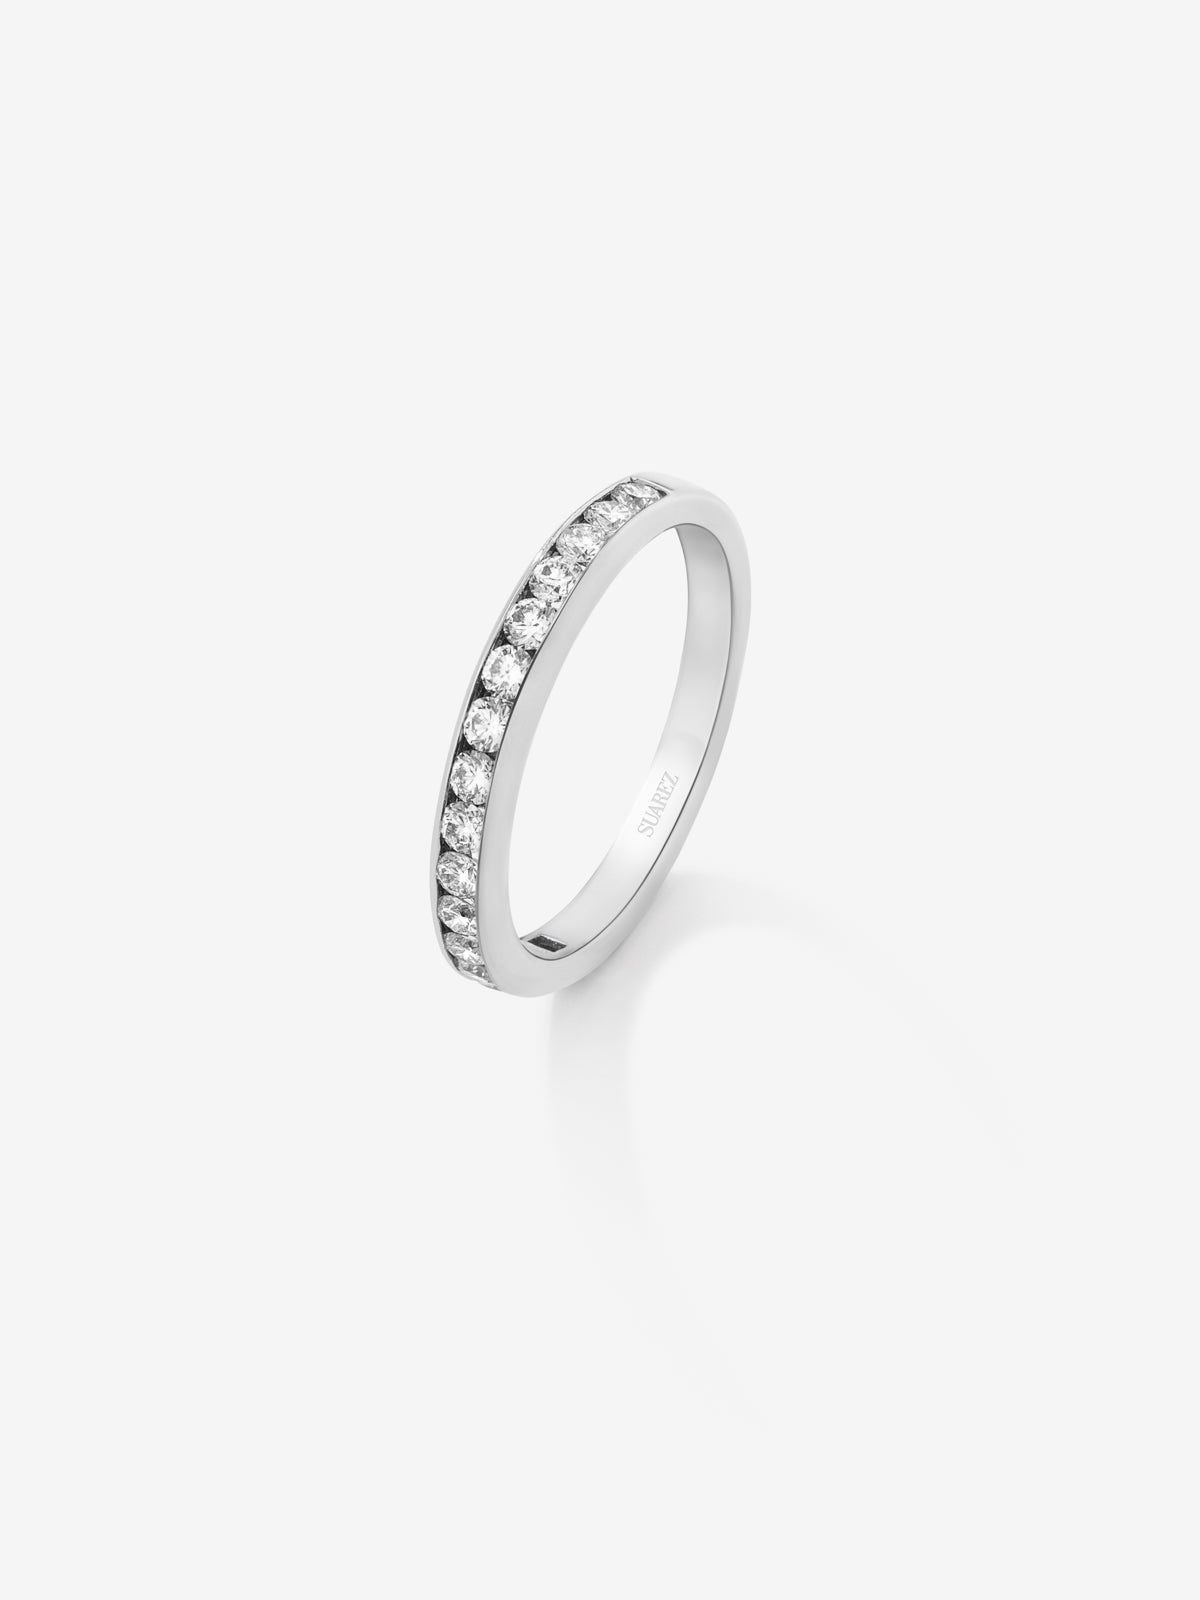 Half ring in 18K white gold with 13 brilliant-cut diamonds with a total of 0.67 cts